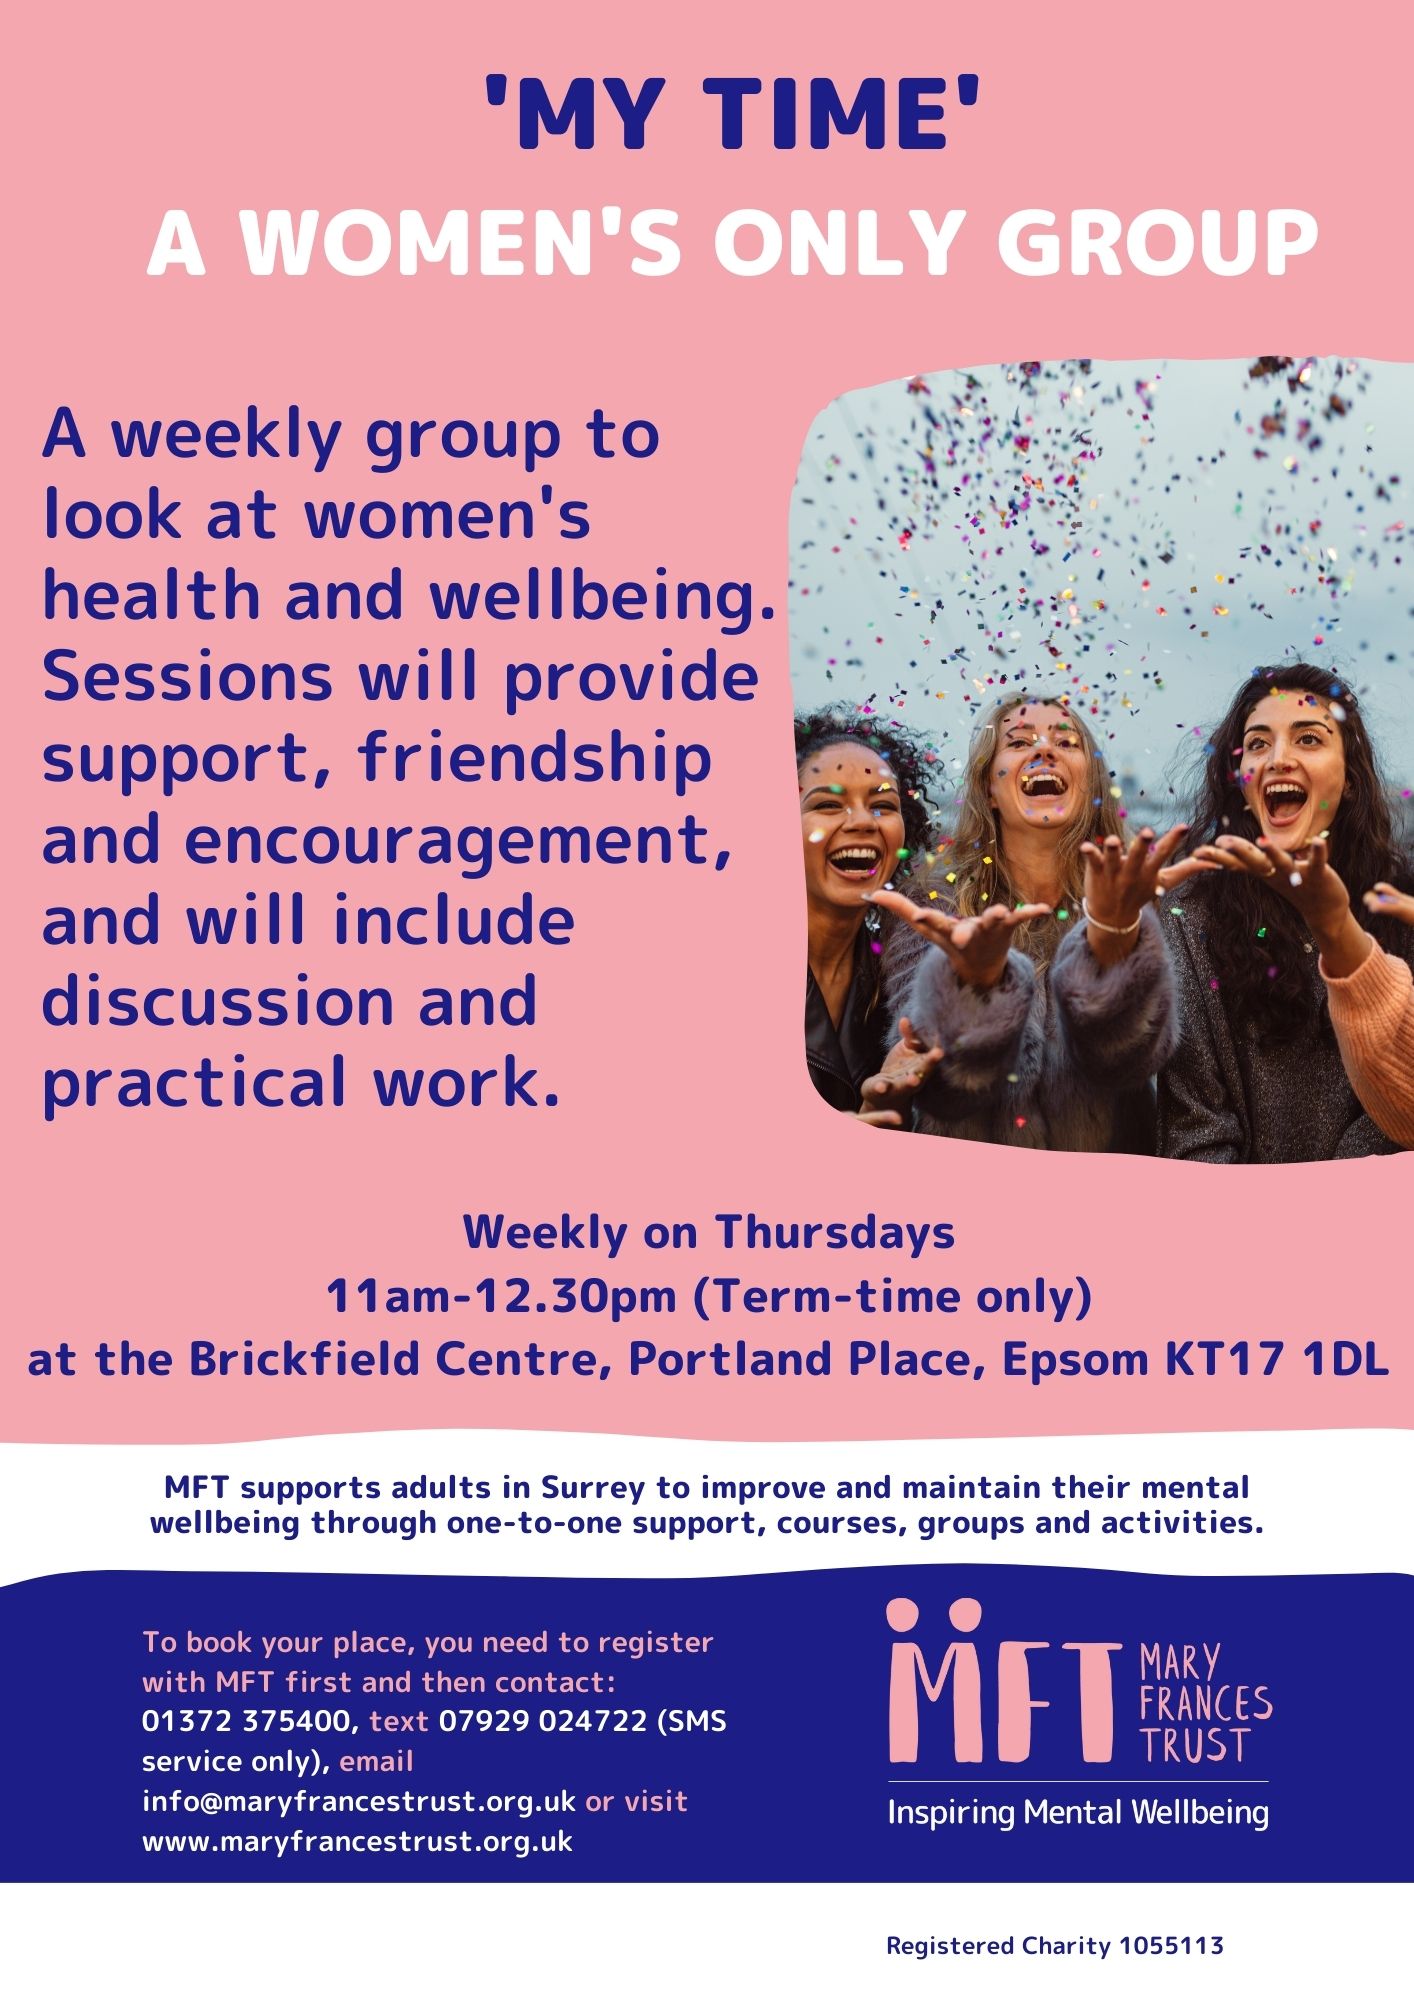 This is Mary Frances Trust's weekly support group for women only every Thursday.